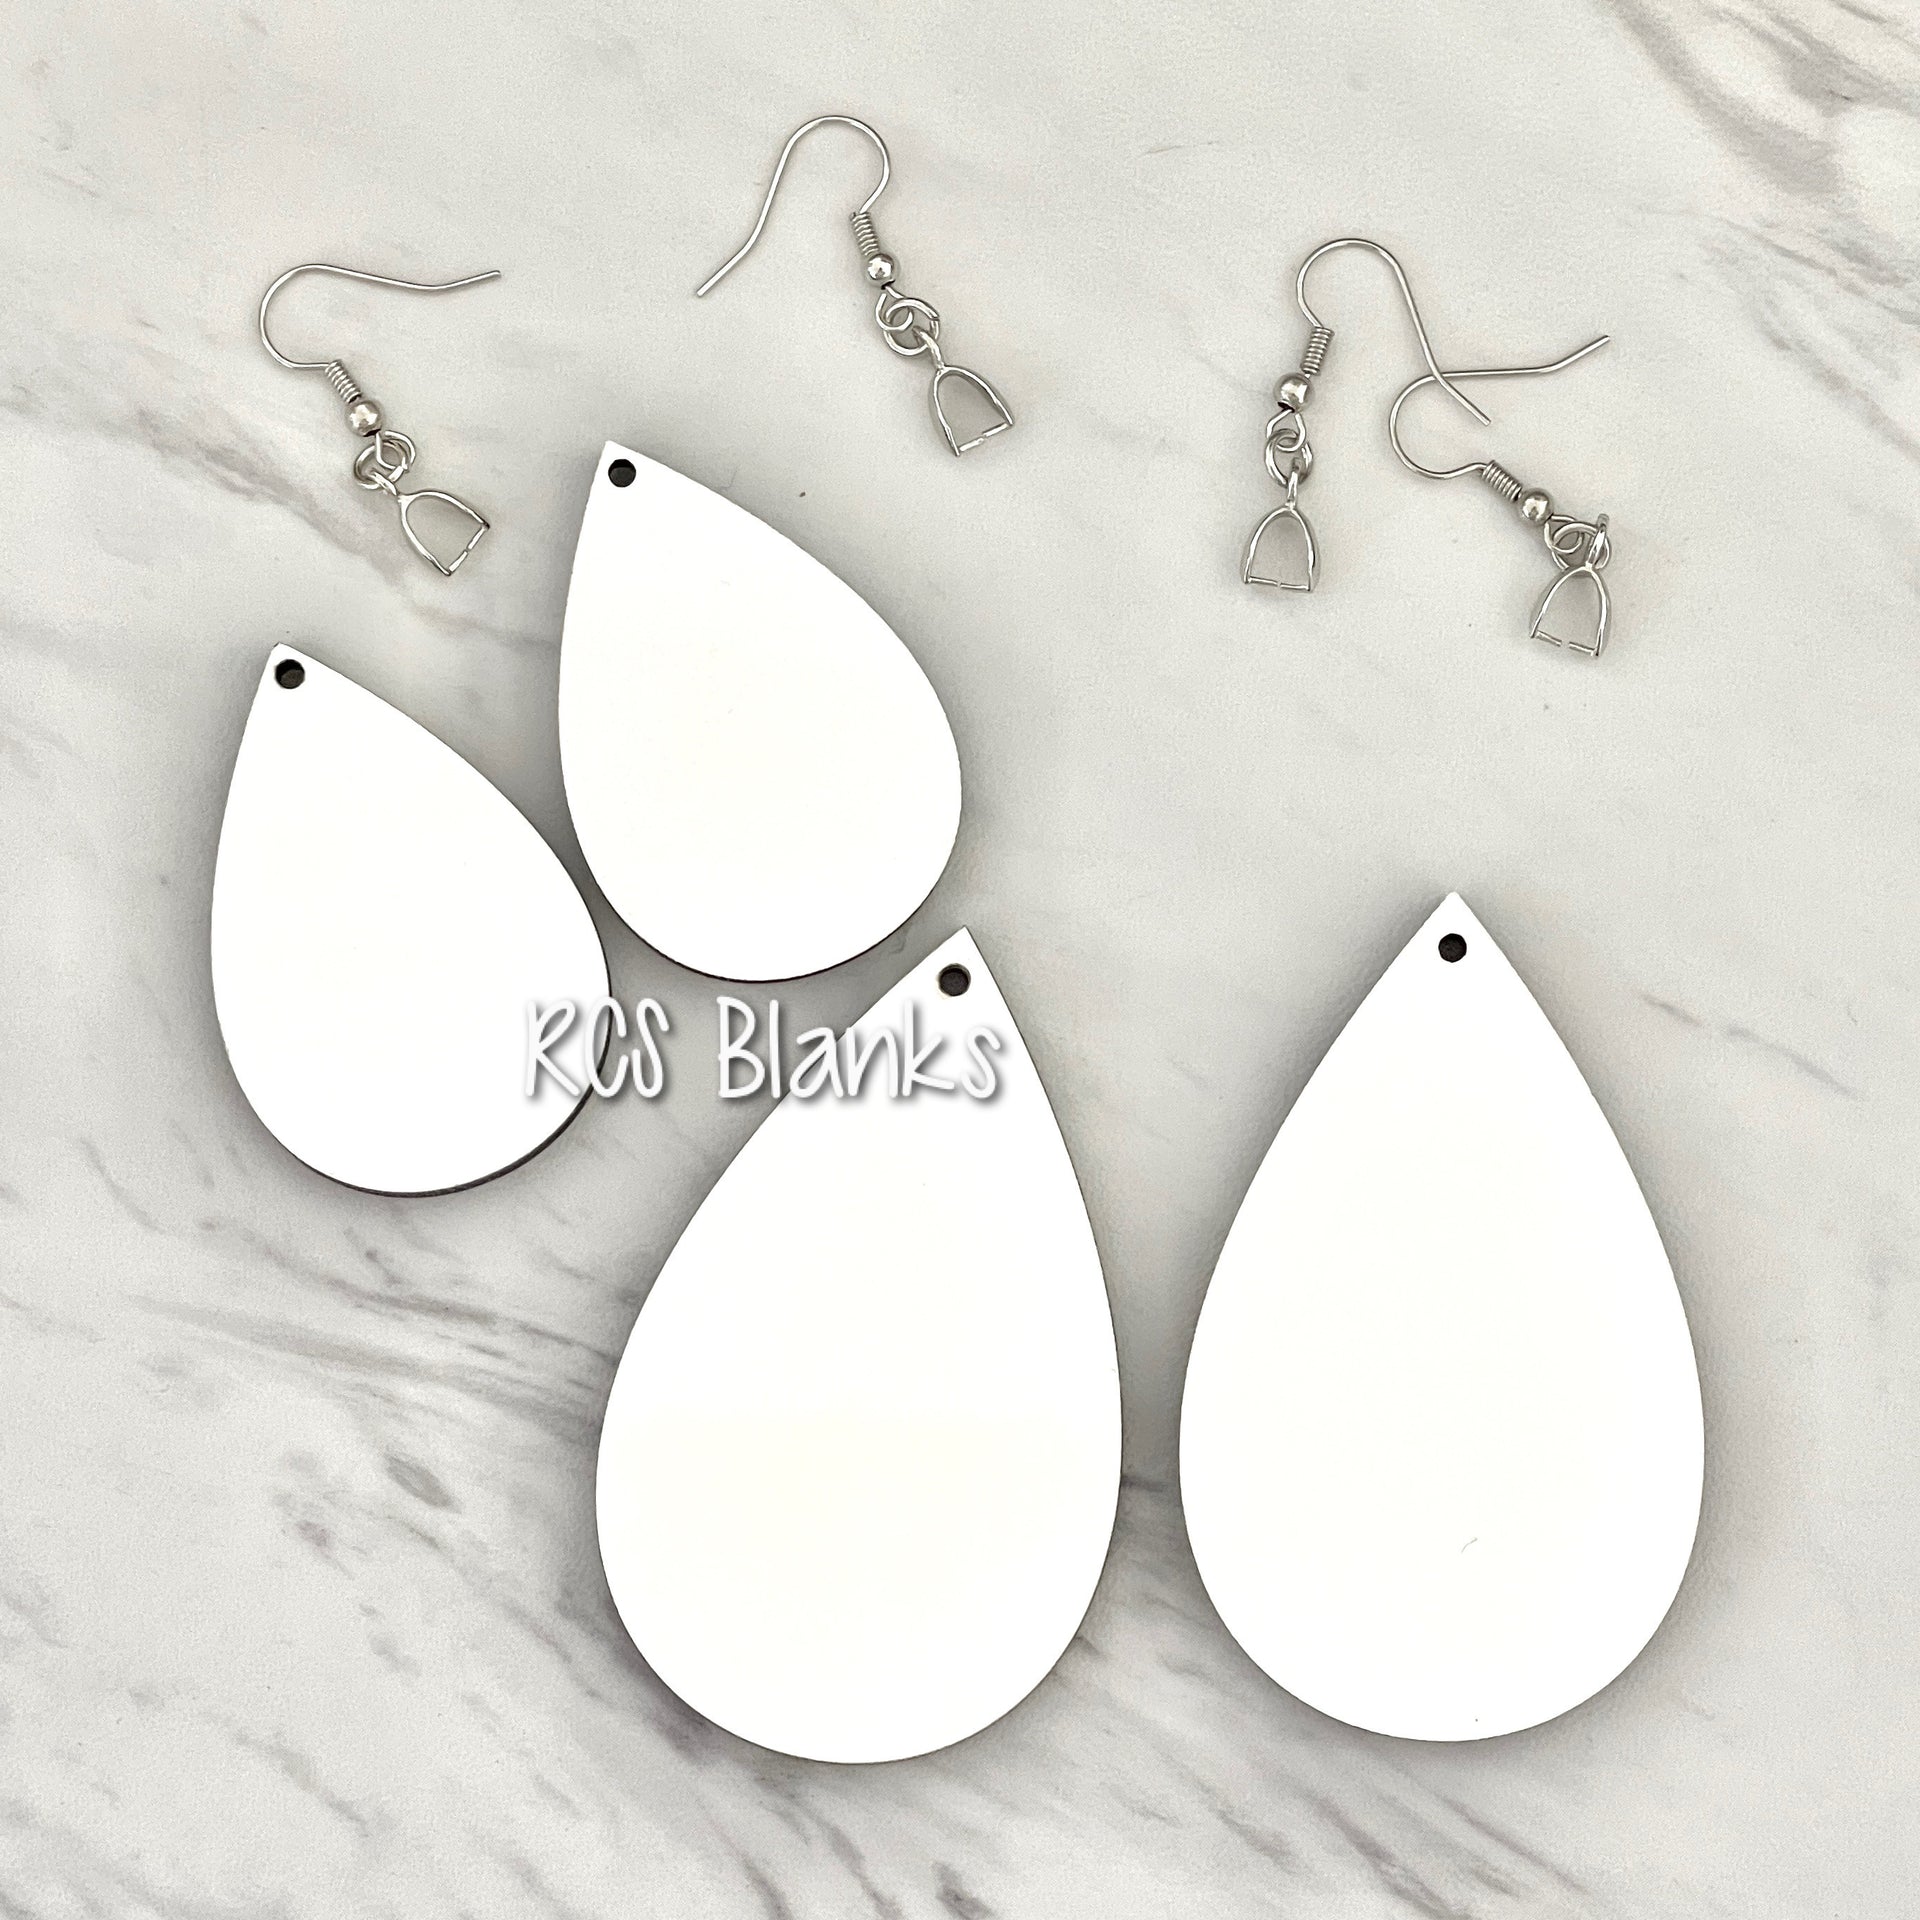 Invest In Blank Sublimation Earrings For A New, Classy Collection 